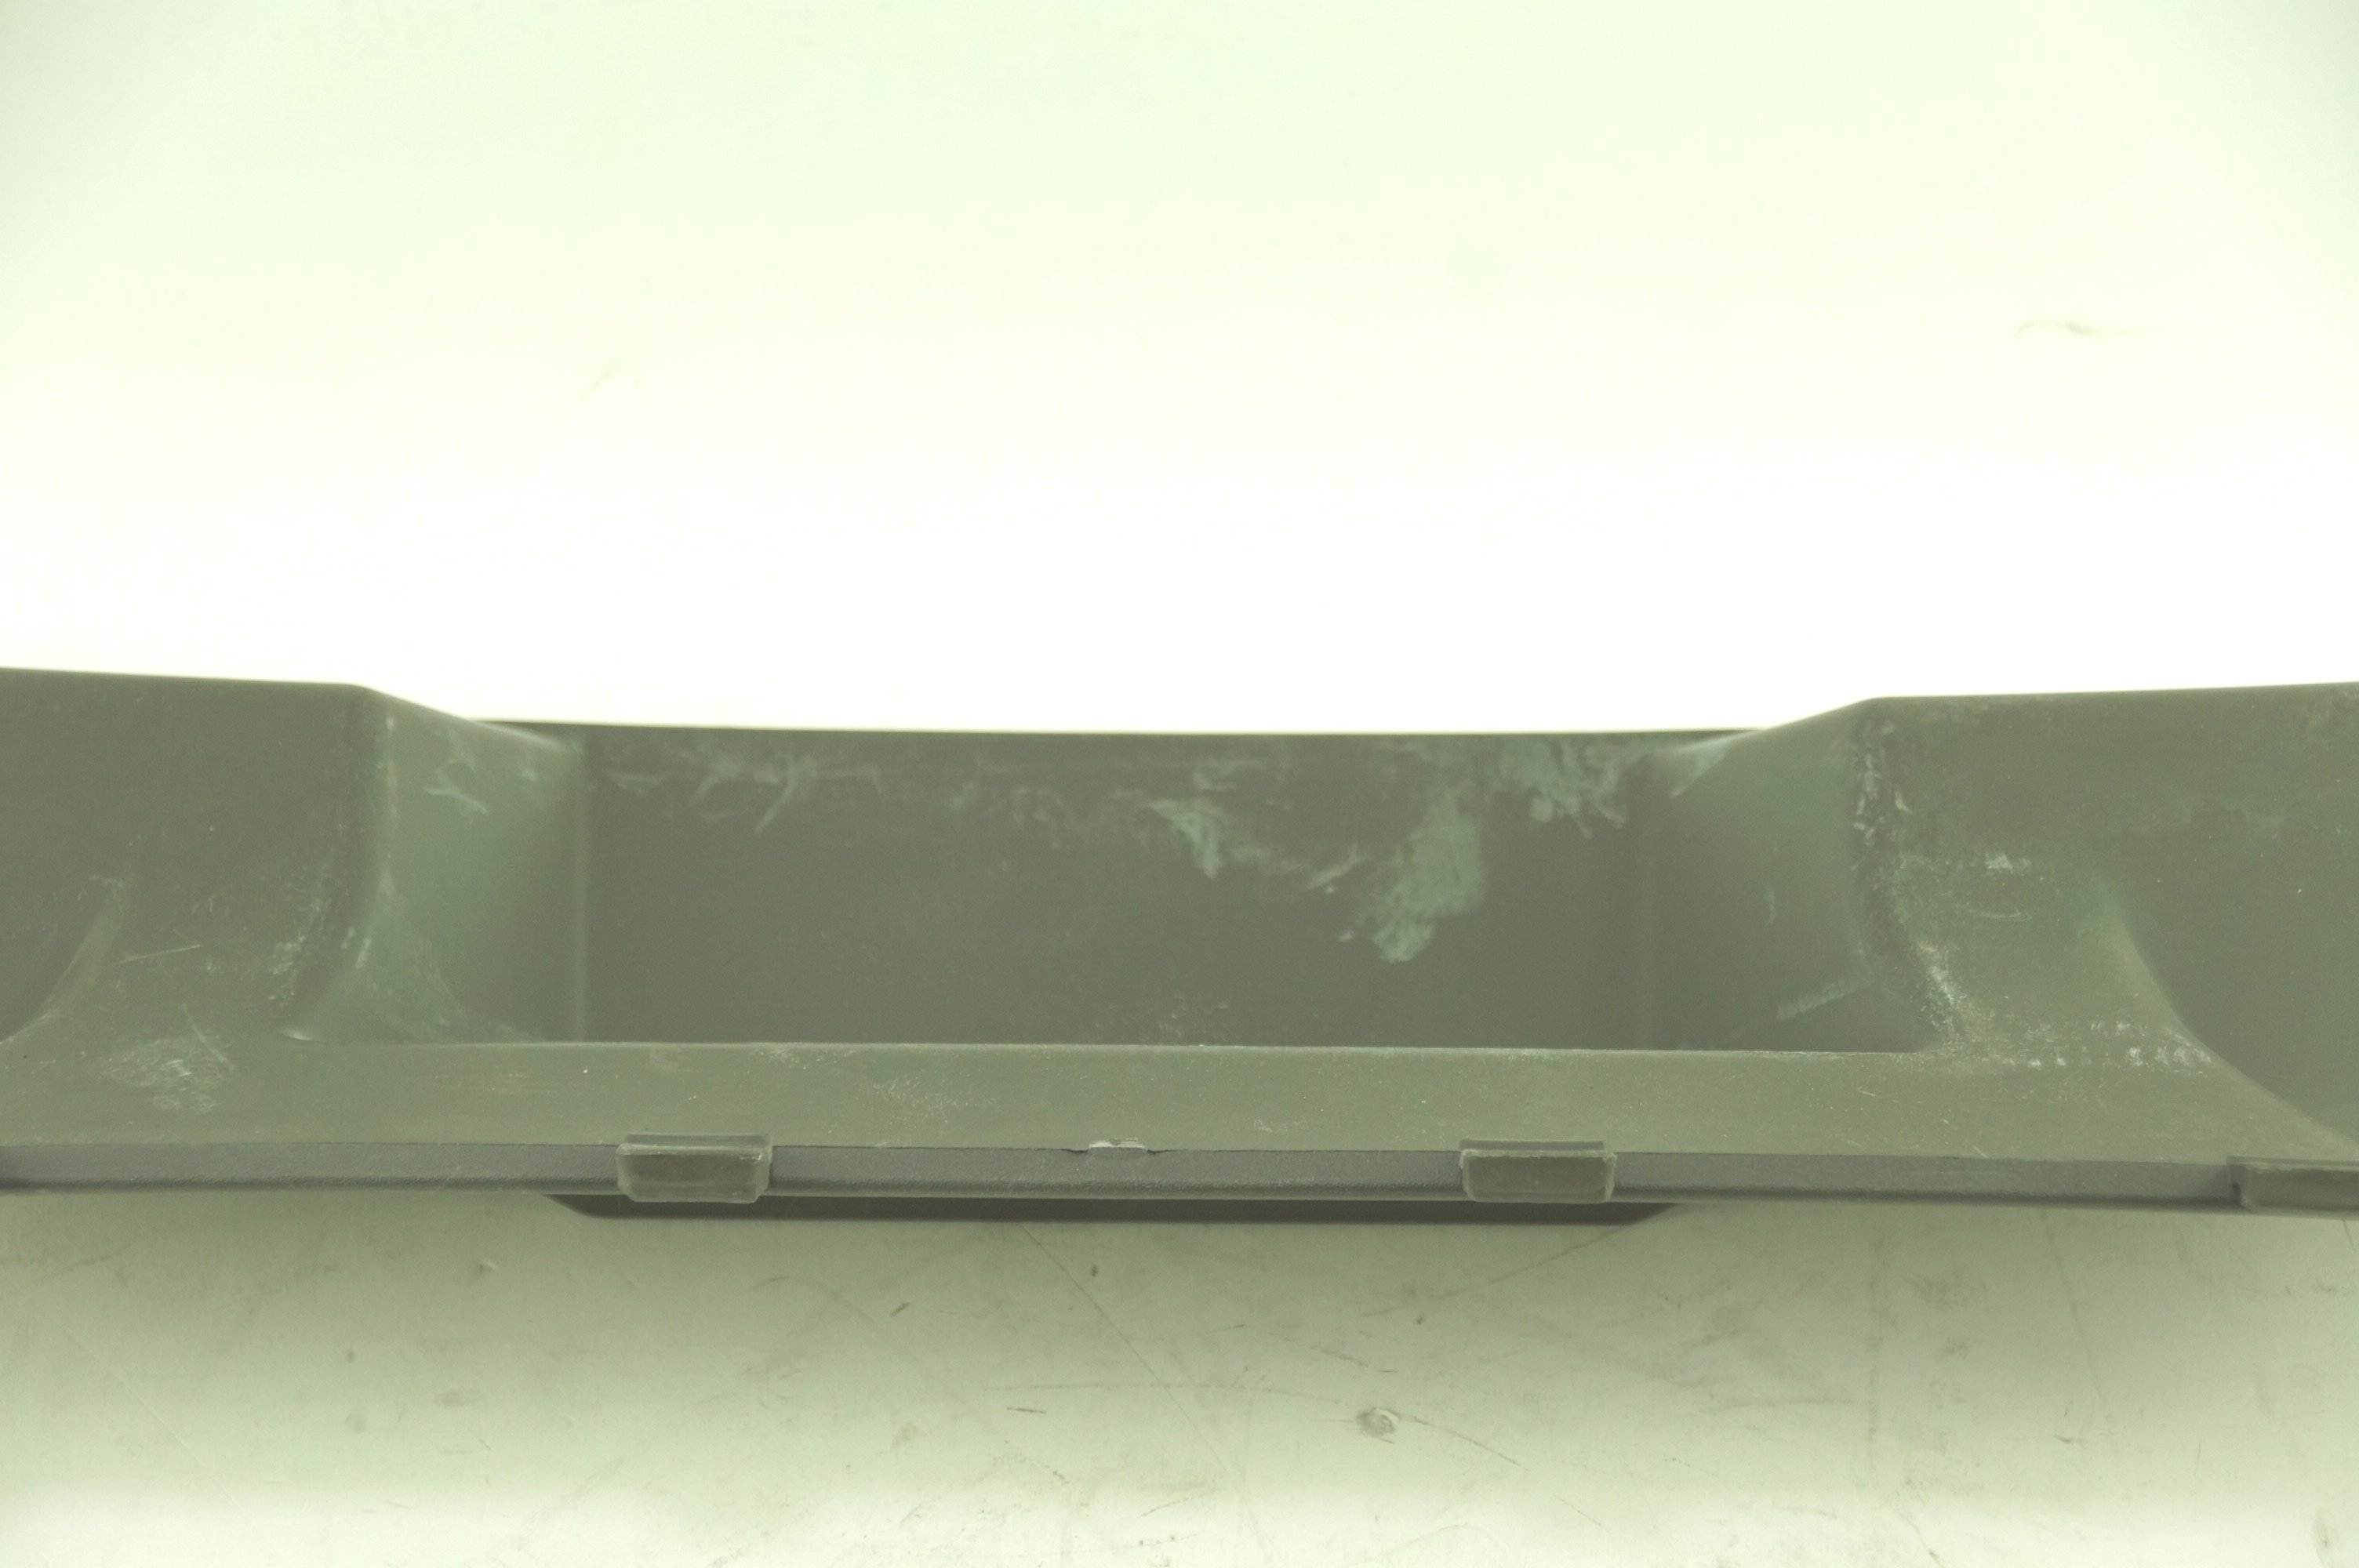 New Genuine OEM 15930191 GM Chevy Traverse Rear Bumper Hitch Cover 09-12 - image 7